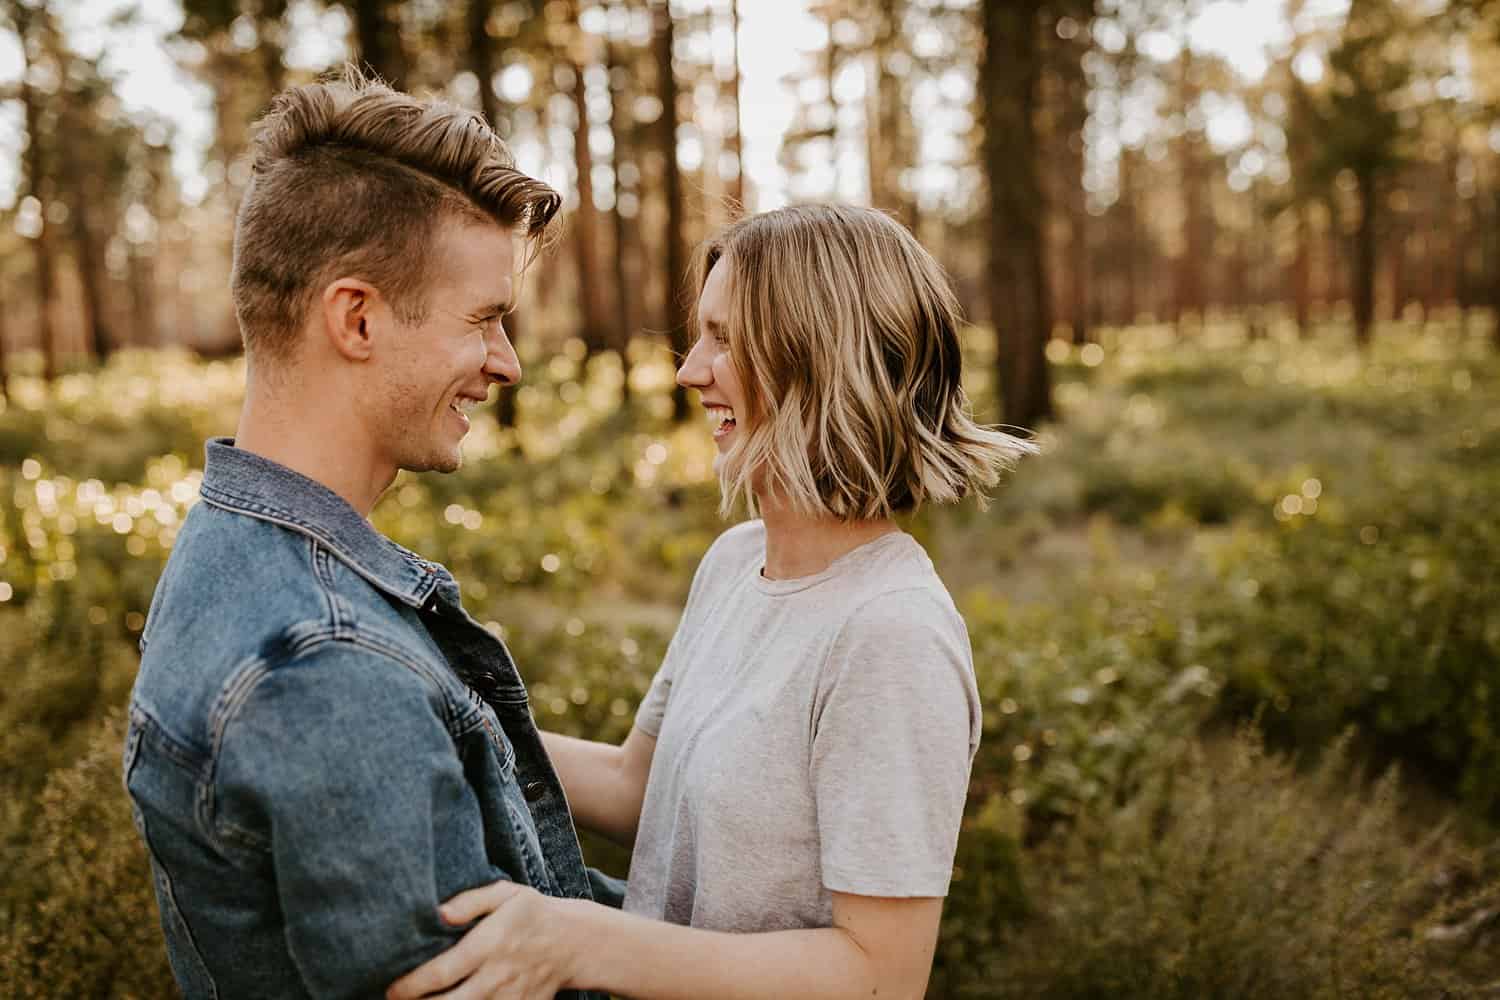 Engaged couple in high desert forest in Central Oregon